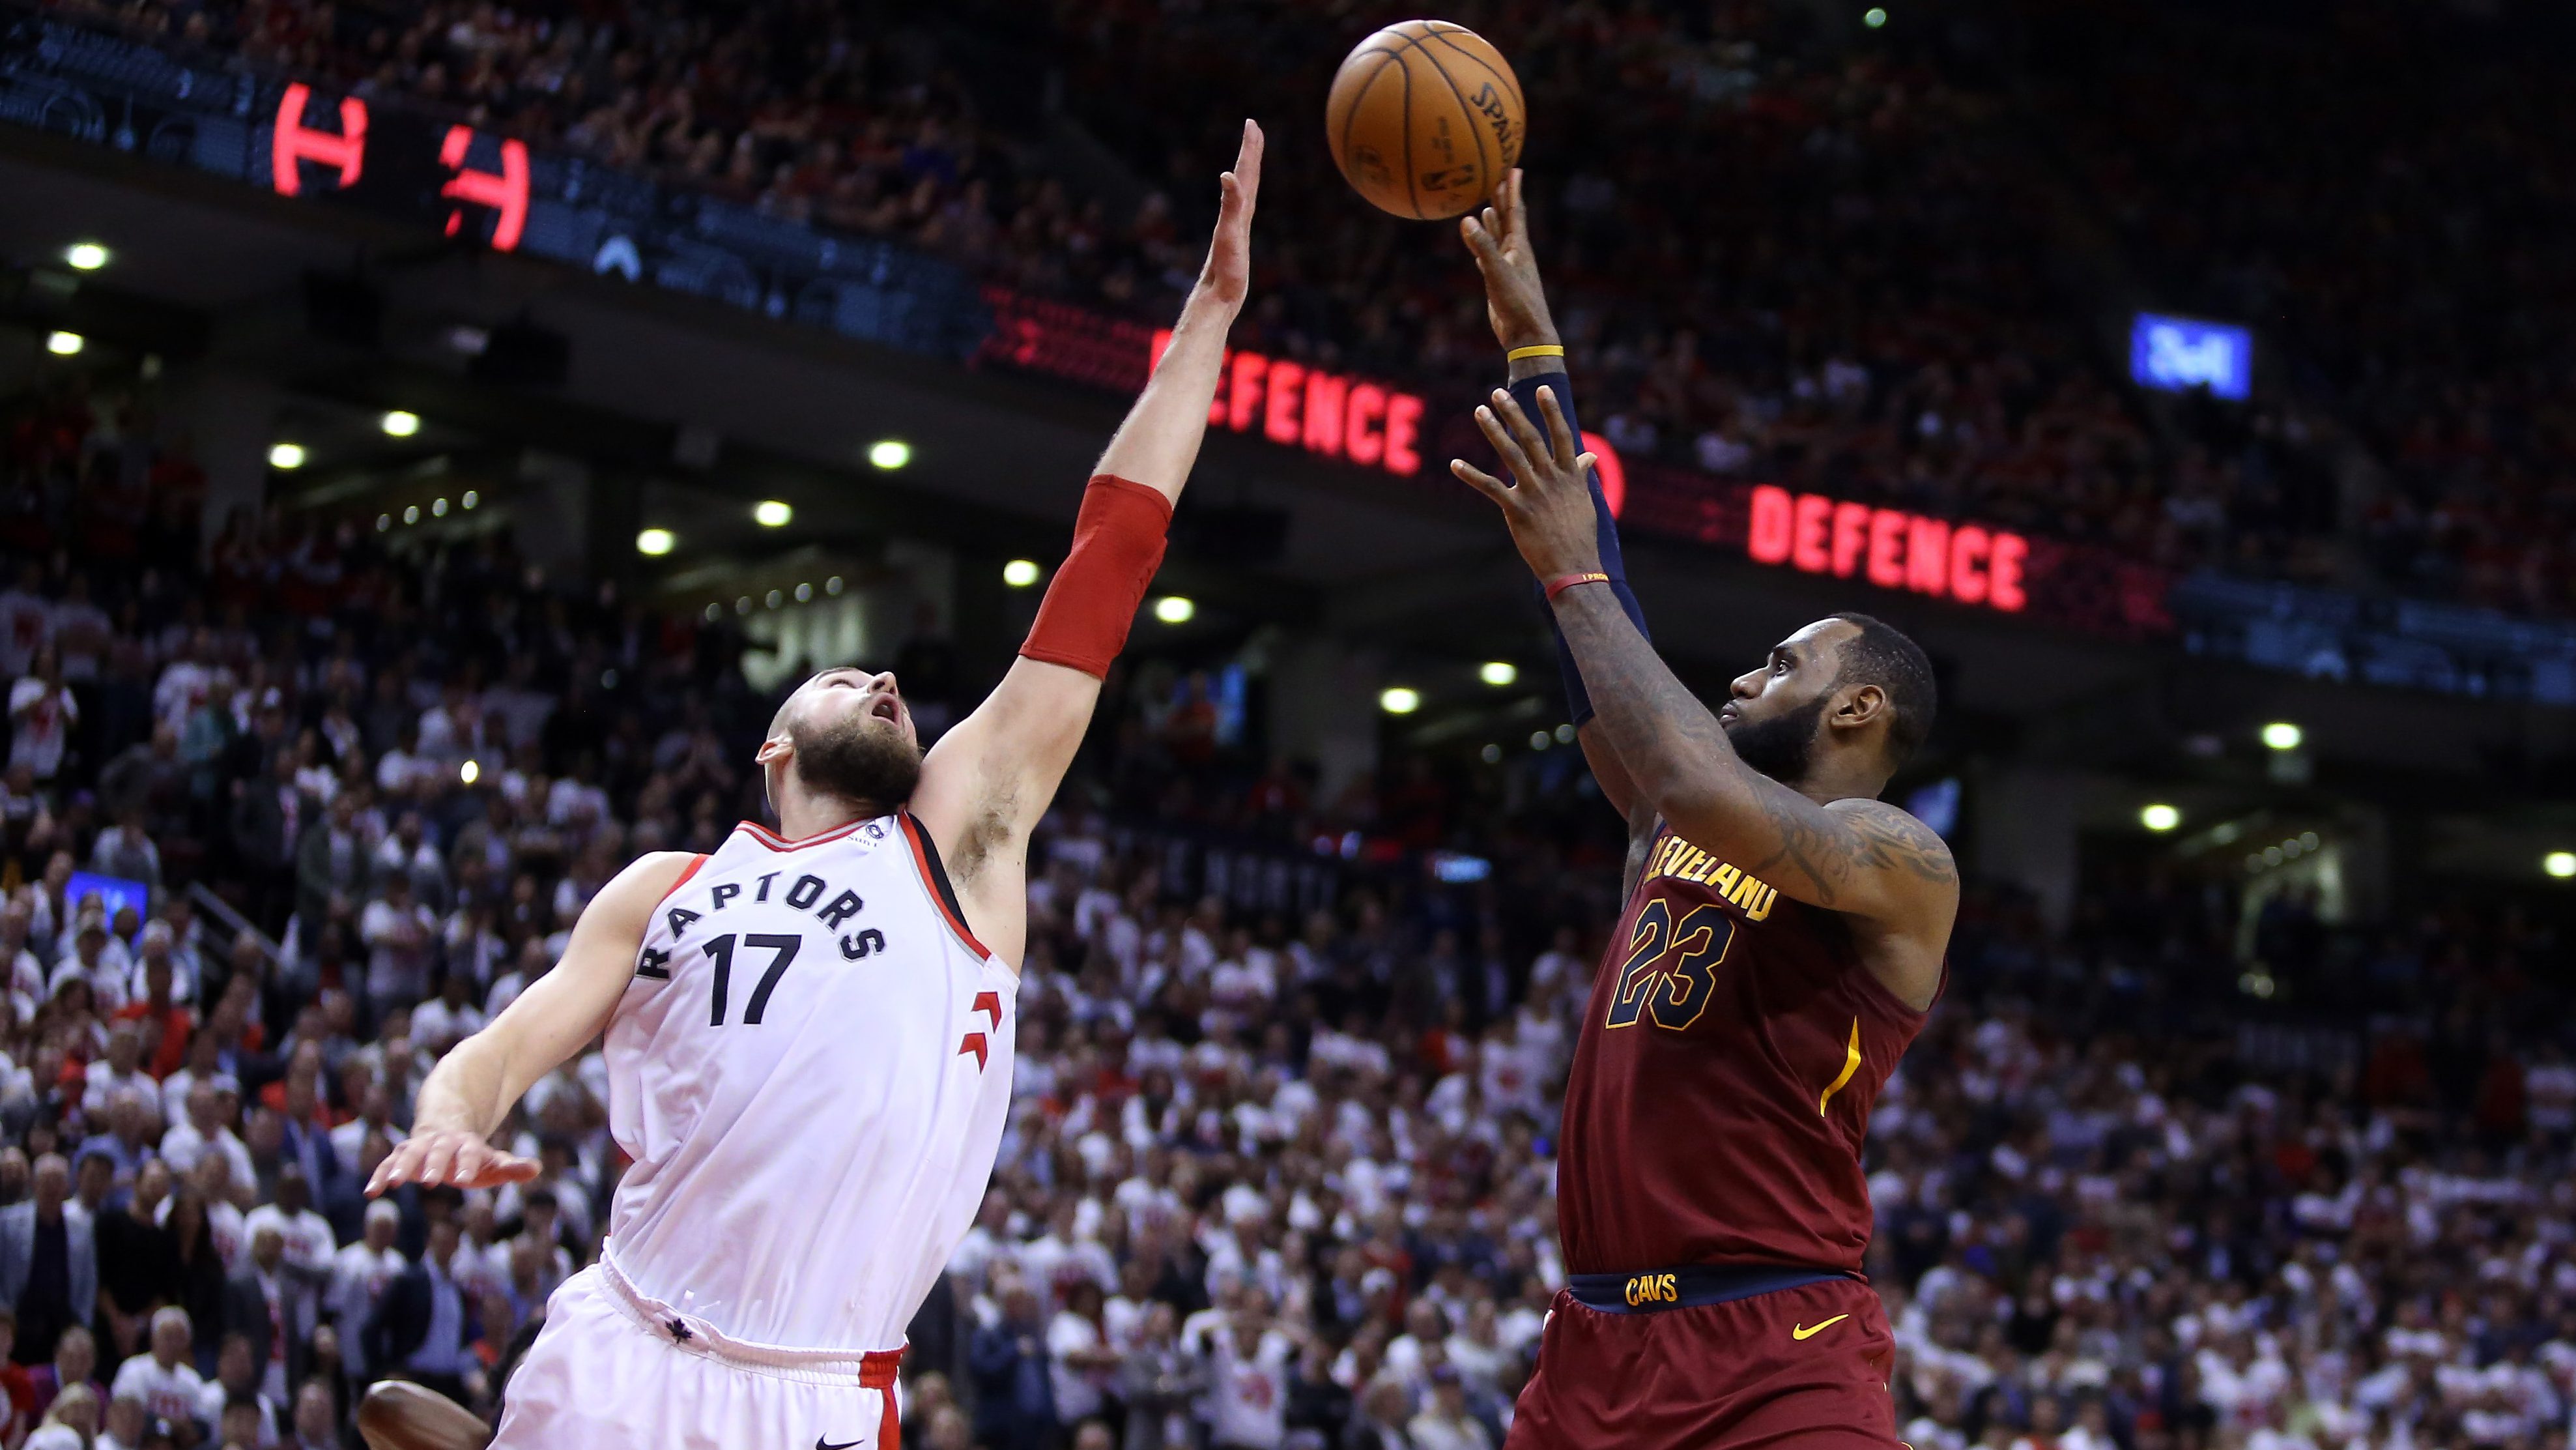 Cavs Raptors Live Stream How to Watch Game 2 Online